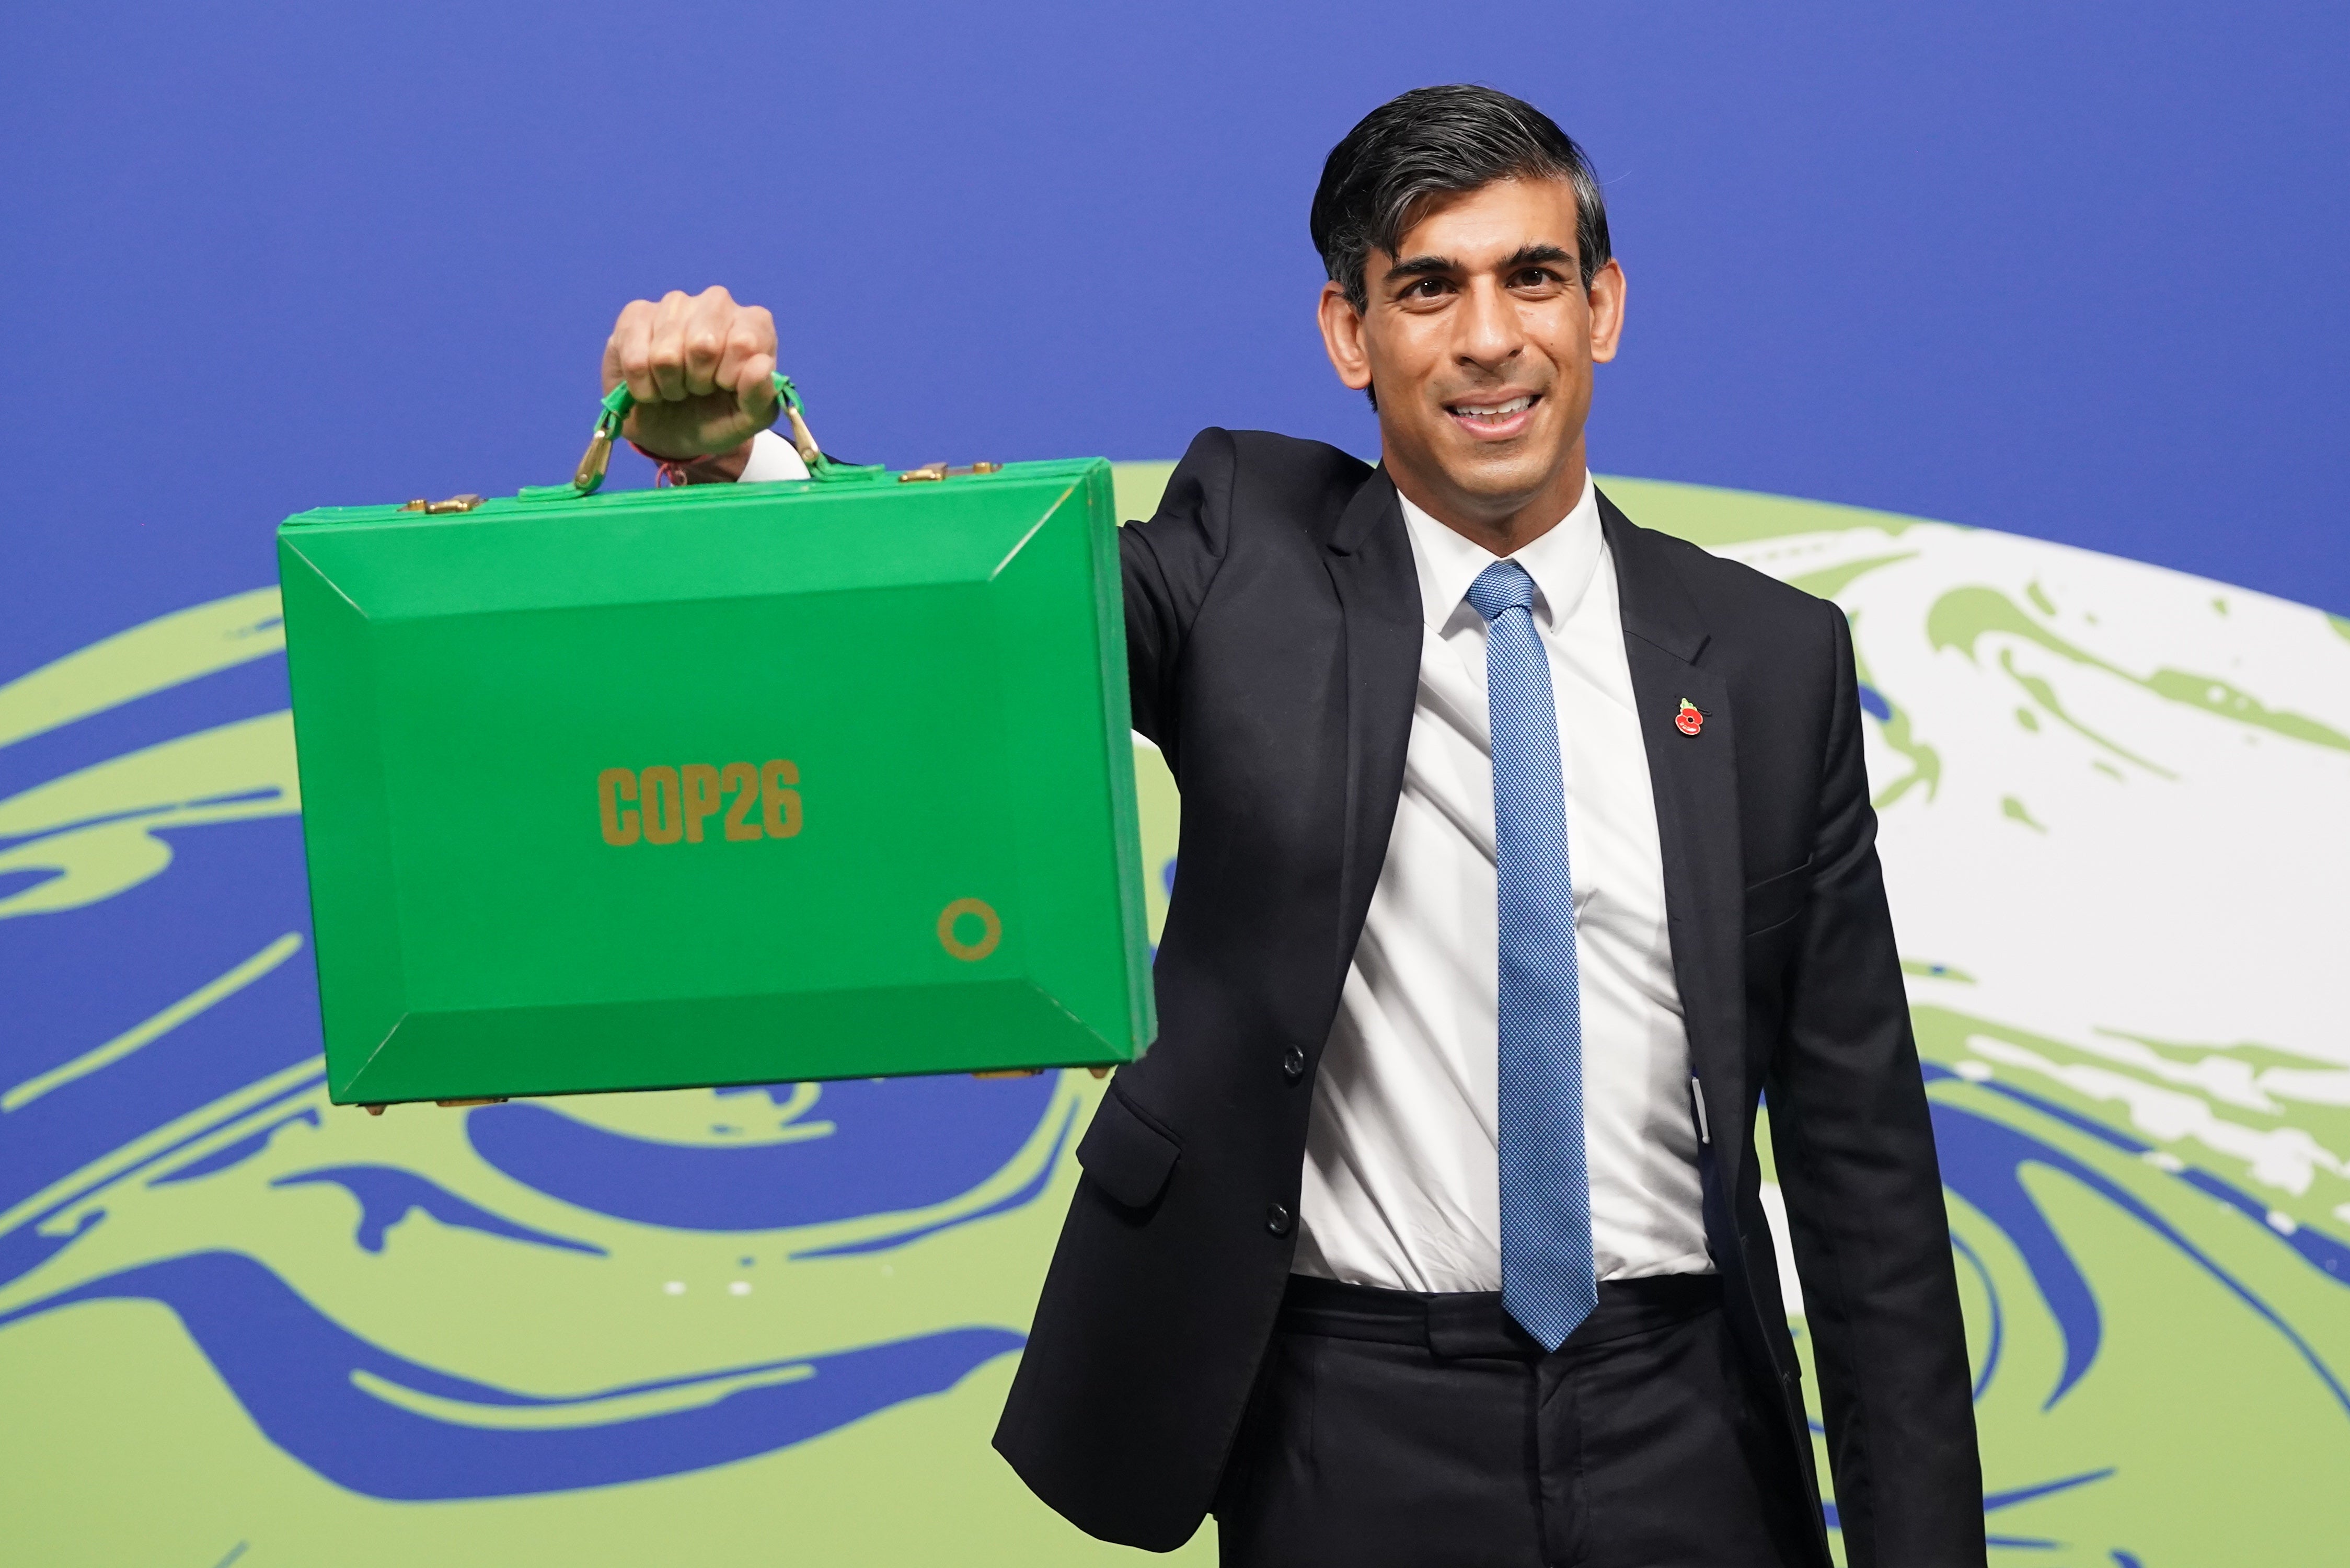 Chancellor Rishi Sunak holds his Green Box at the Cop26 summit in Glasgow (Stefan Rousseau/PA)